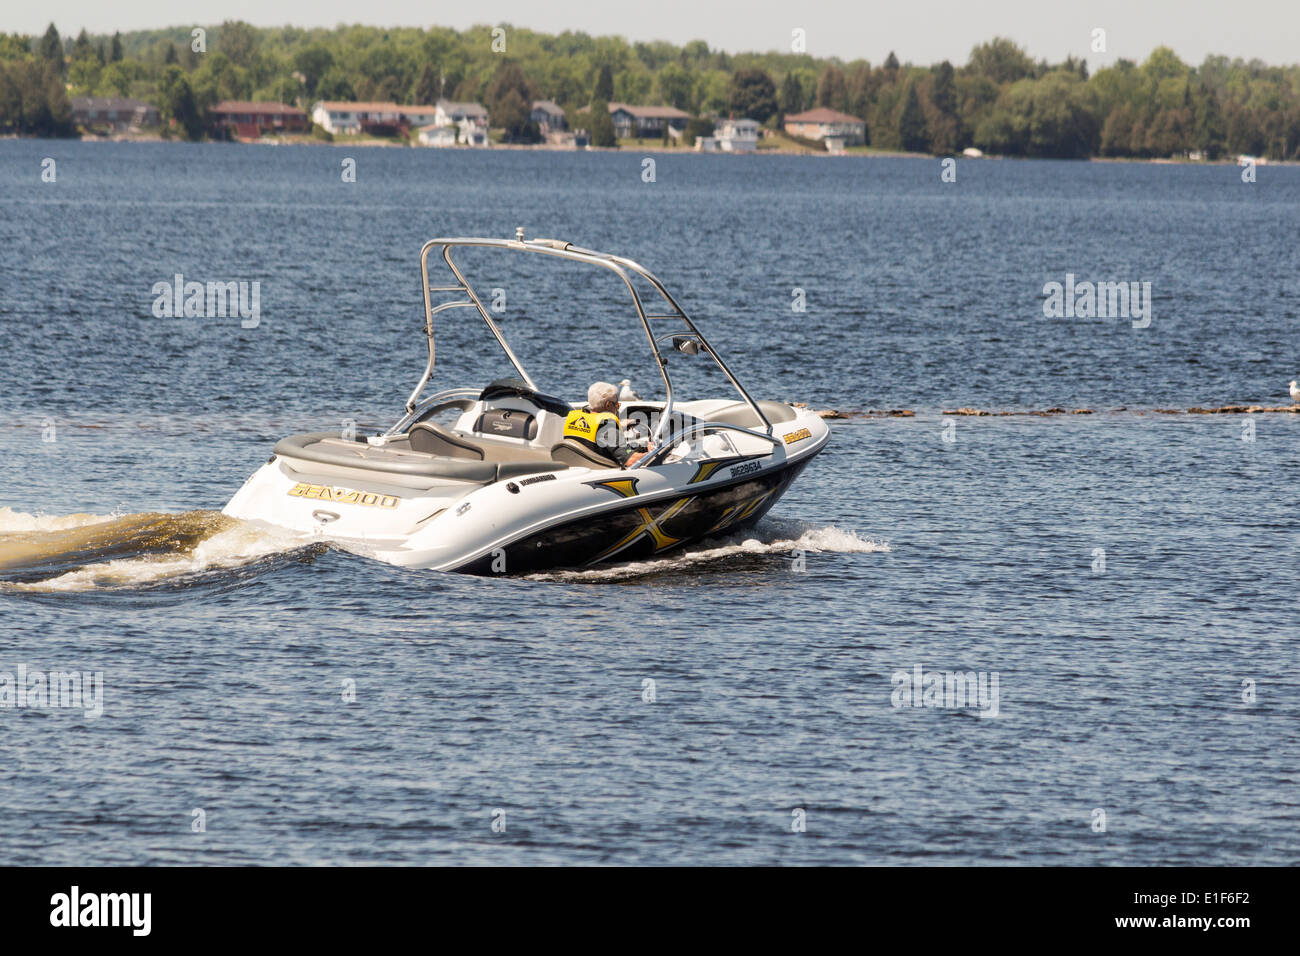 Man in Sea Doo motor boats traveling at medium speed through the blue water. Stock Photo